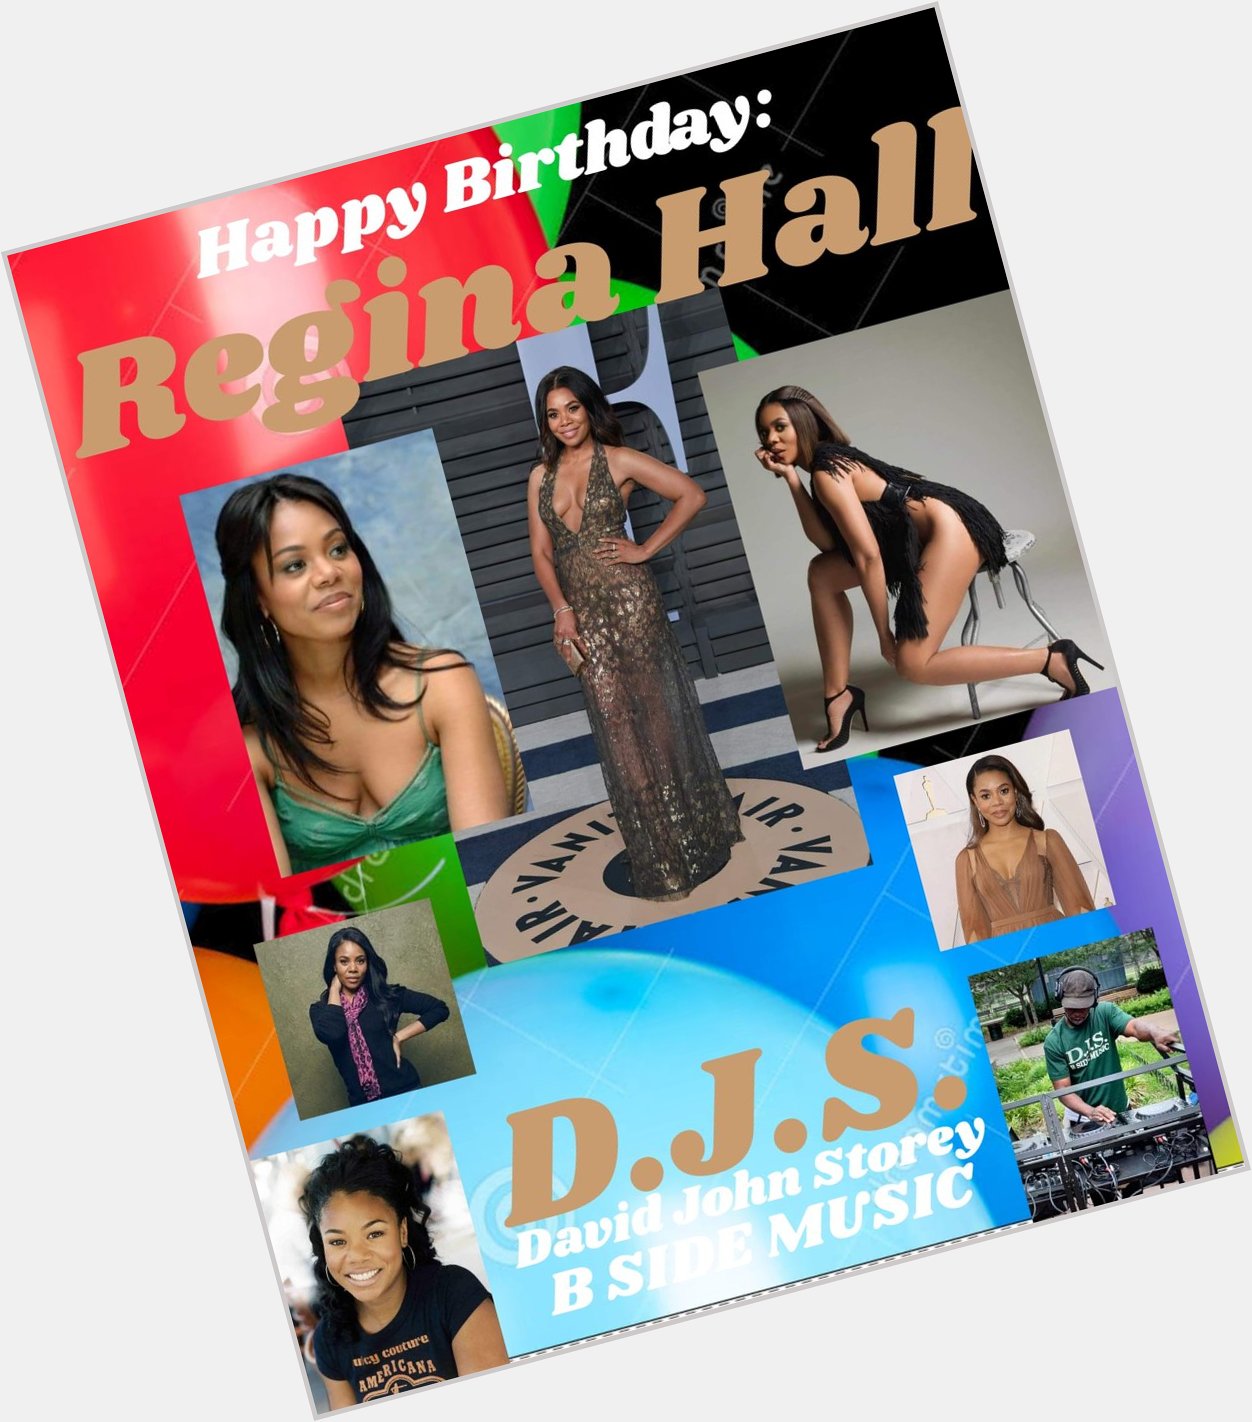 I(D.J.S.)\"B SIDE\" taking time to say Happy Birthday to Actress: \"REGINA HALL\"!!!! 